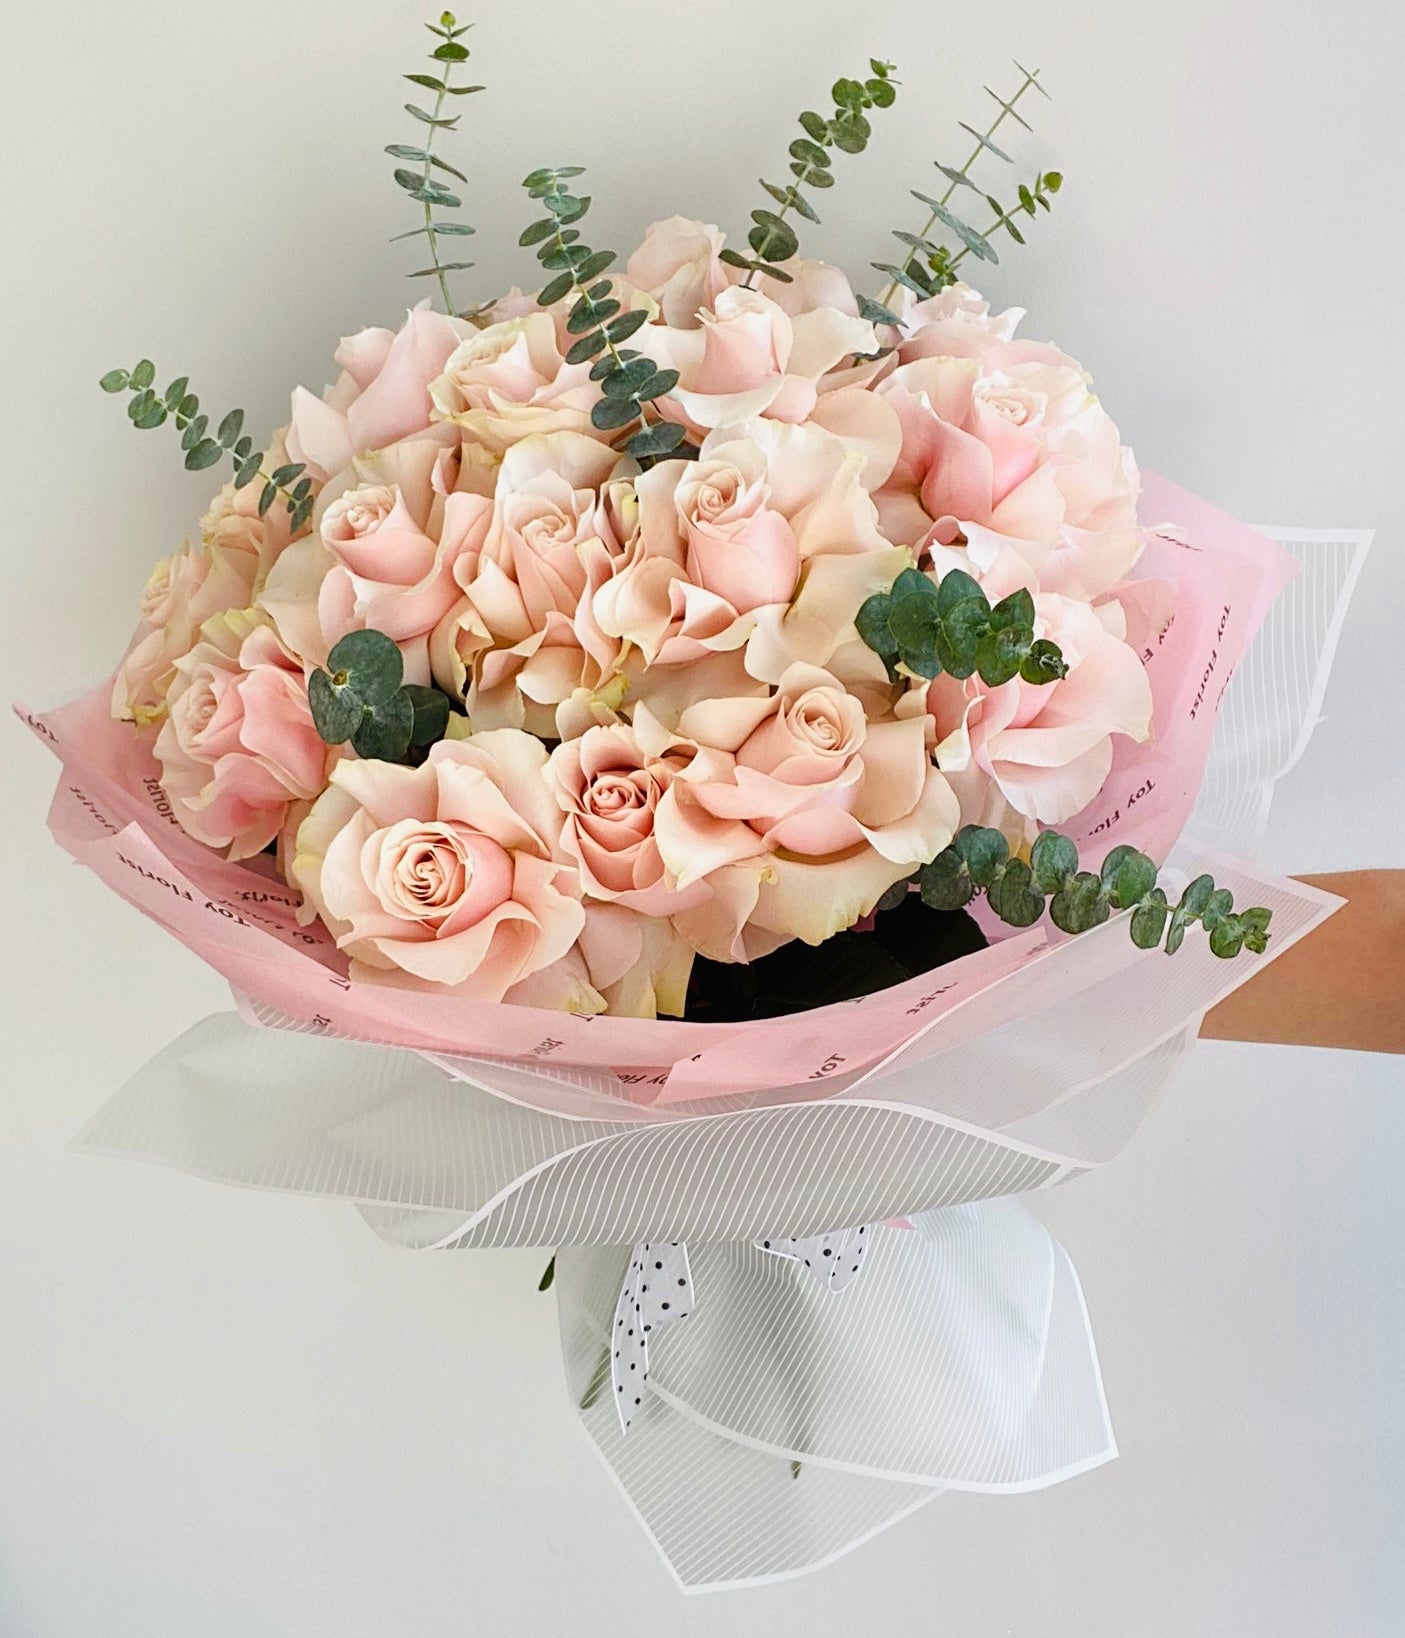 French Roses Bouquet - Toy Florist